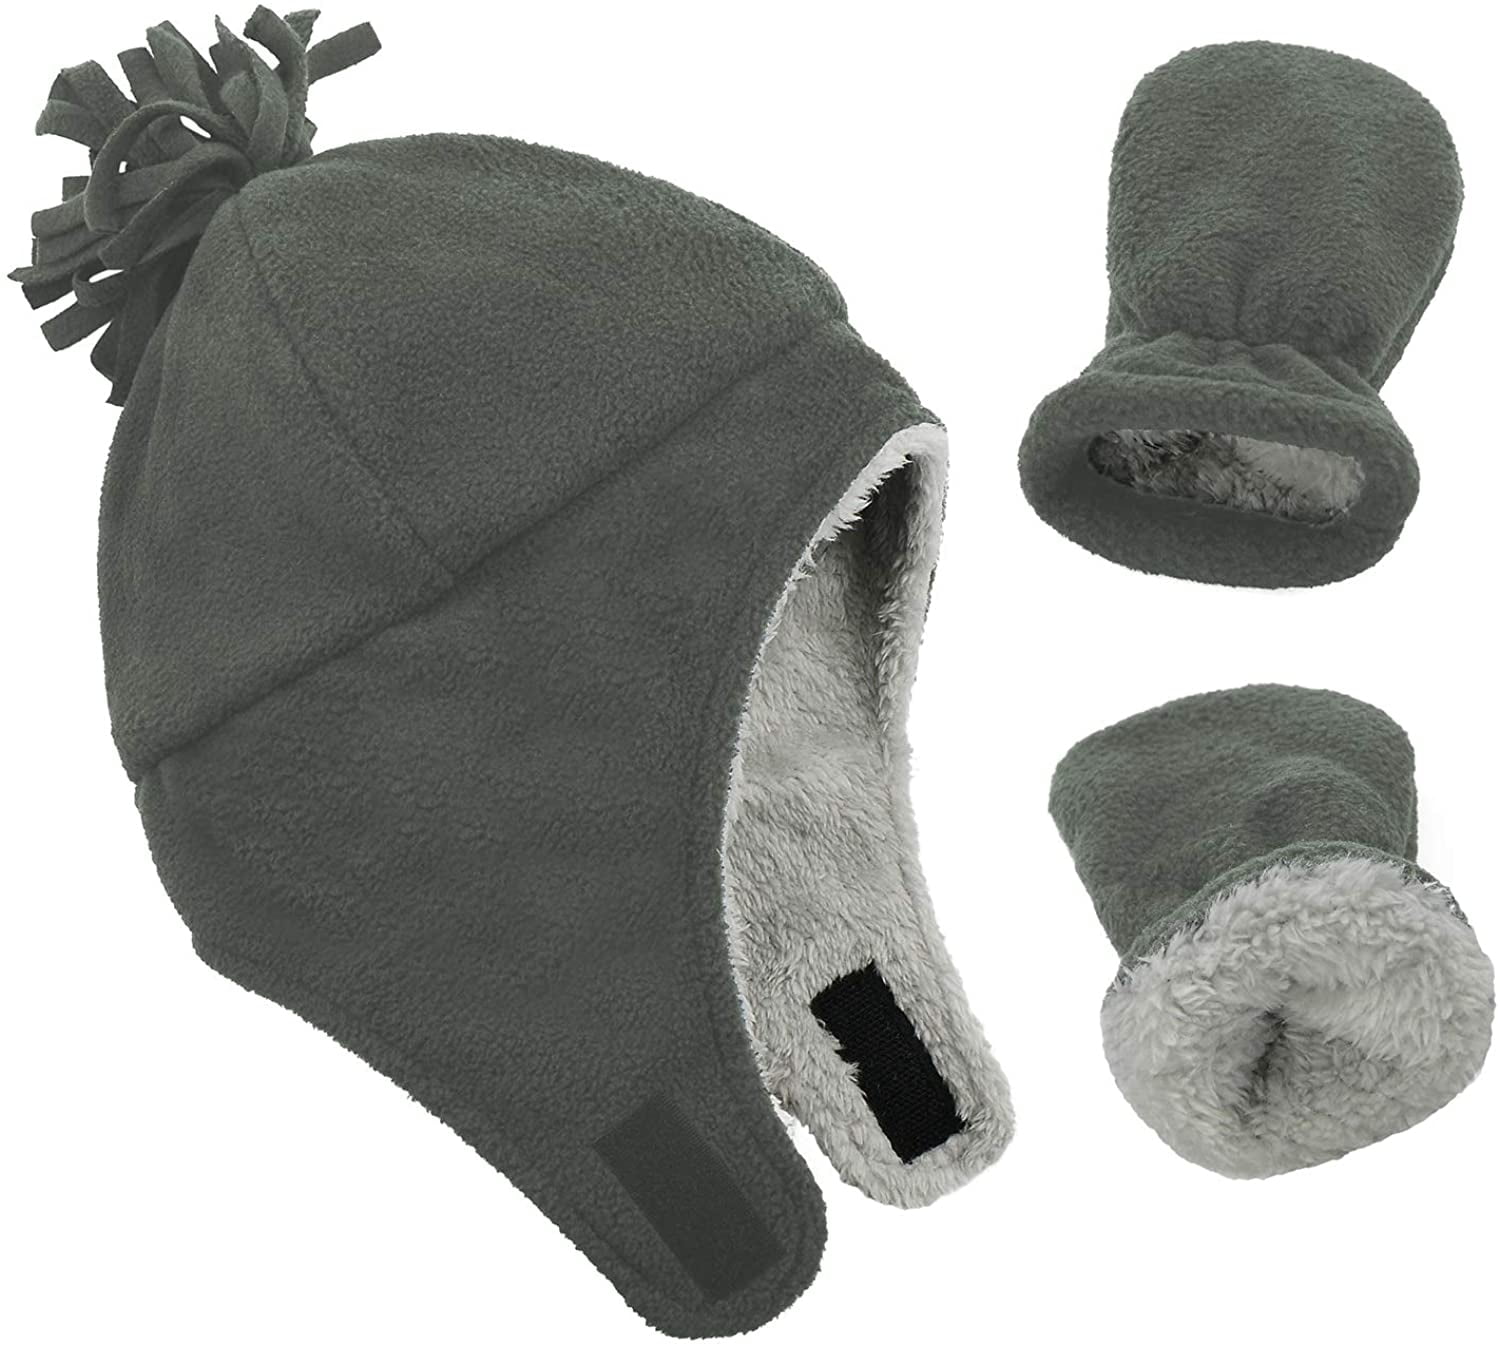 3 Pieces Baby Kids Winter Hat Sherpa Lined Hat Warm Fleece Hat with Ear Flaps for Girls Boys